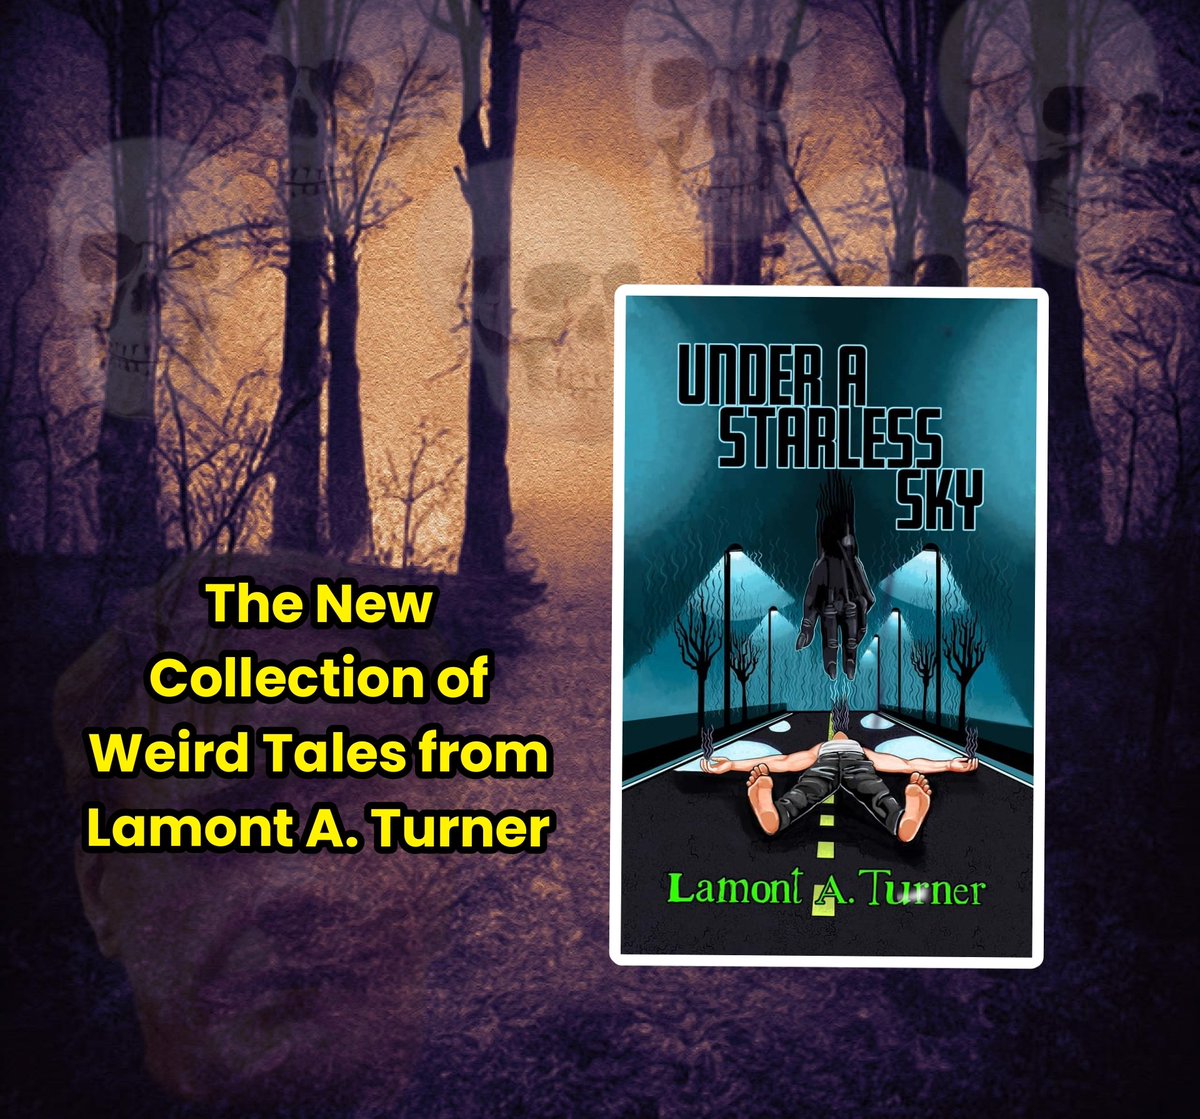 @AJWritesWorlds Welcome back to the haunted swamps of the deep south with the third volume of weird short fiction from Lamont A Turner. Under a Starless Sky is another mind-bending brew of Lovecraftian horror, pulp noir, and dark mystery. amazon.com/dp/B0D2XT164Q?…